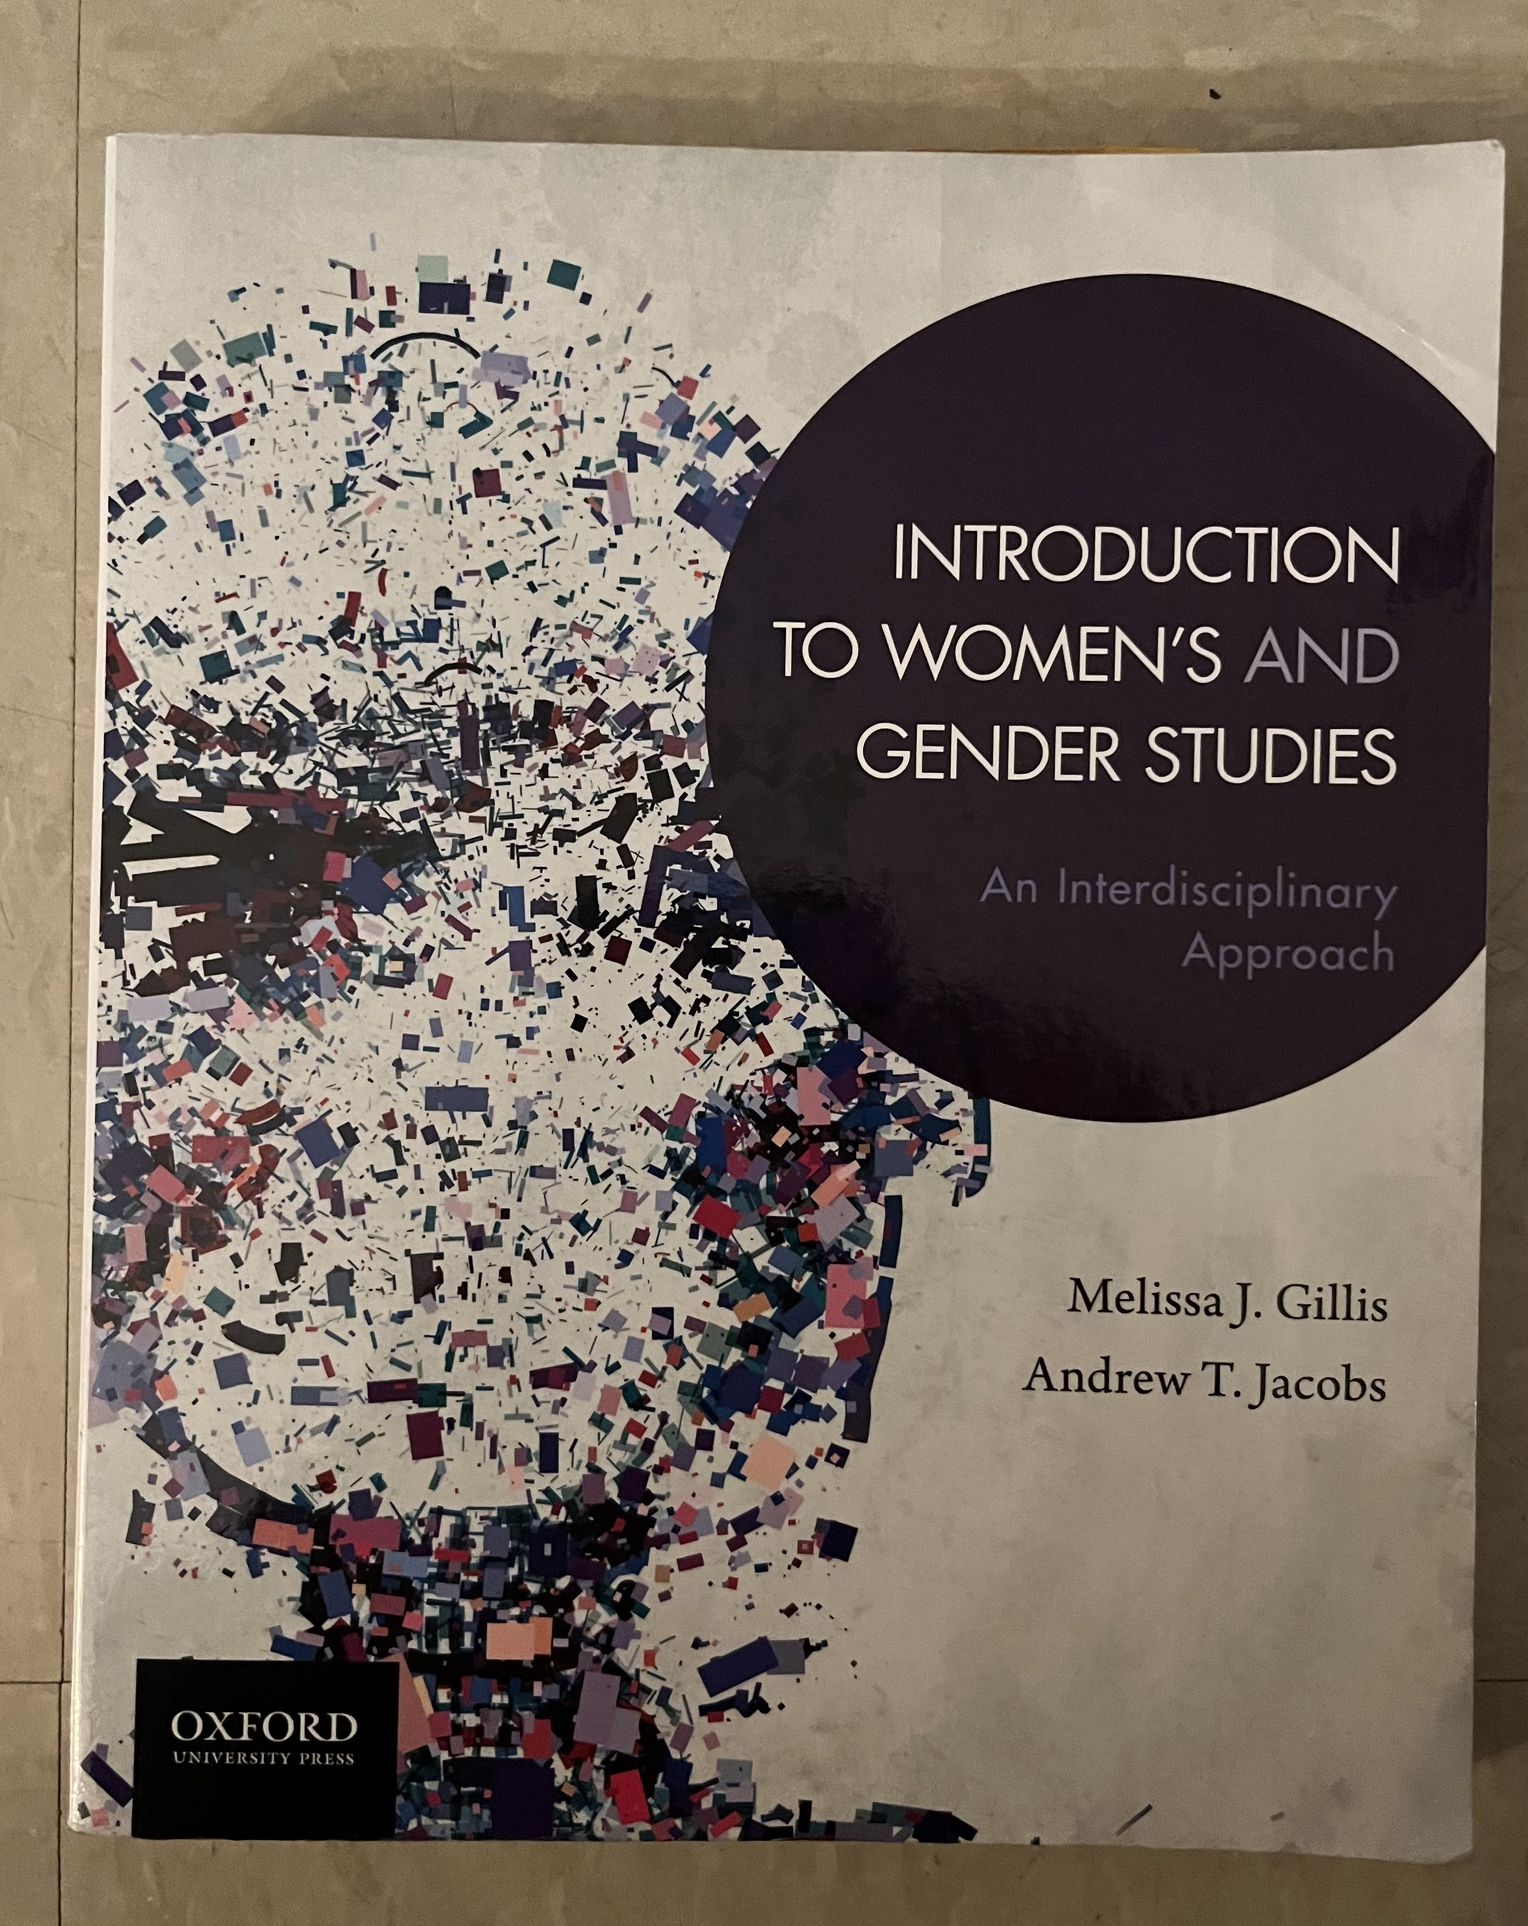 INTRODUCTION TO WOMEN'S AND GENDER STUDIES